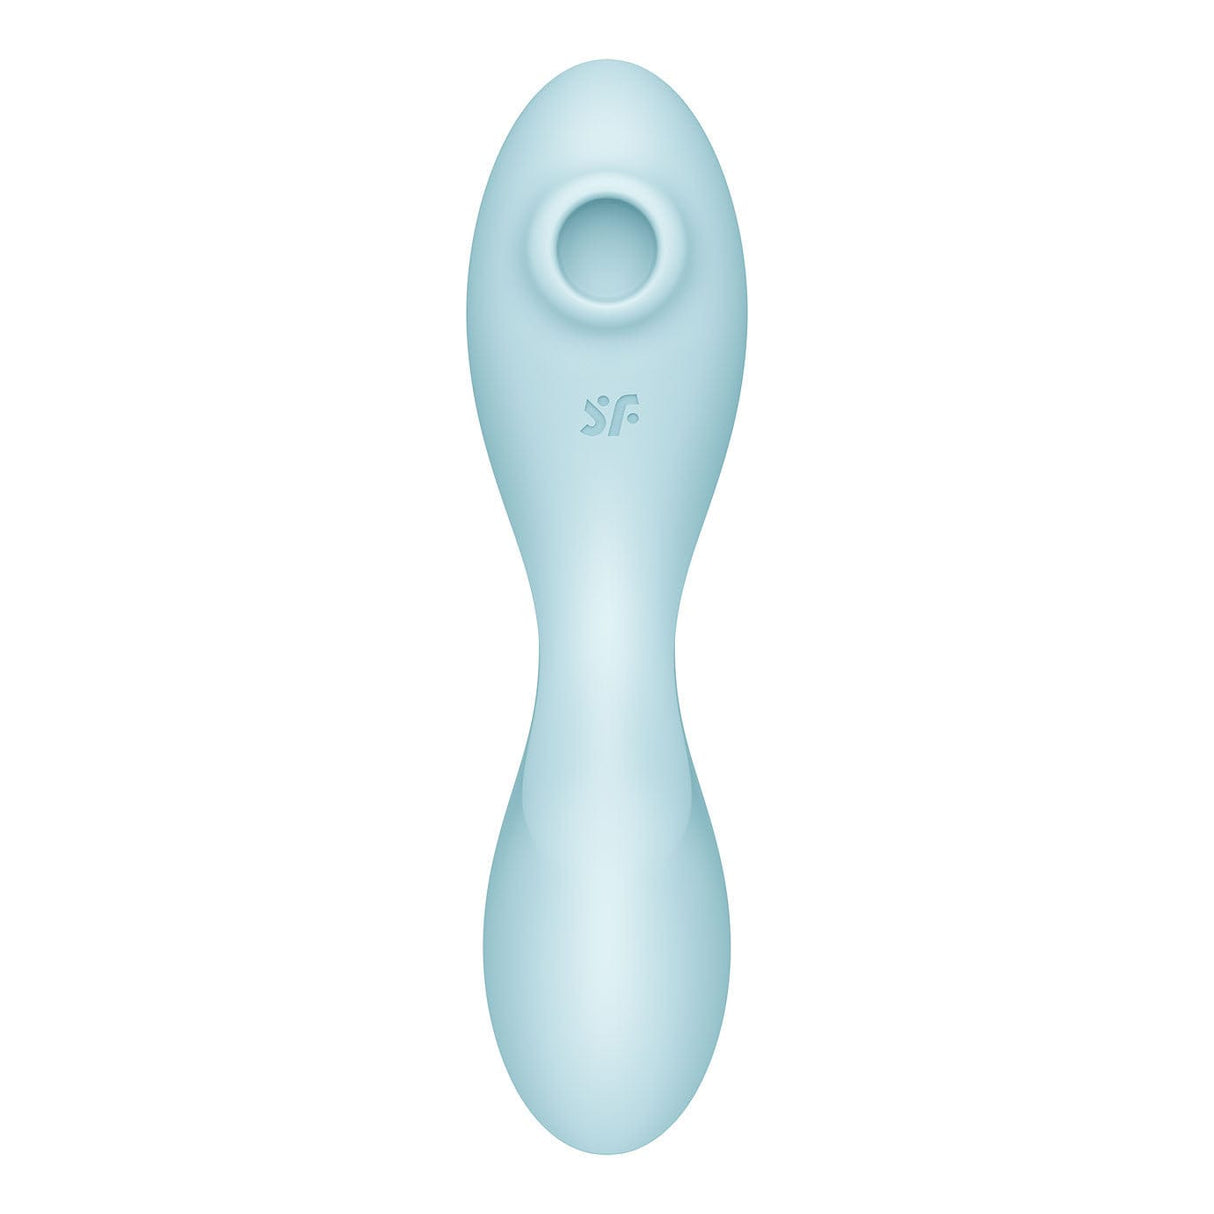 Satisfyer - Curvy App-Controlled Trinity 5 Clitoral Air Stimulator Vibrator (Light Blue)    Clit Massager (Vibration) Rechargeable